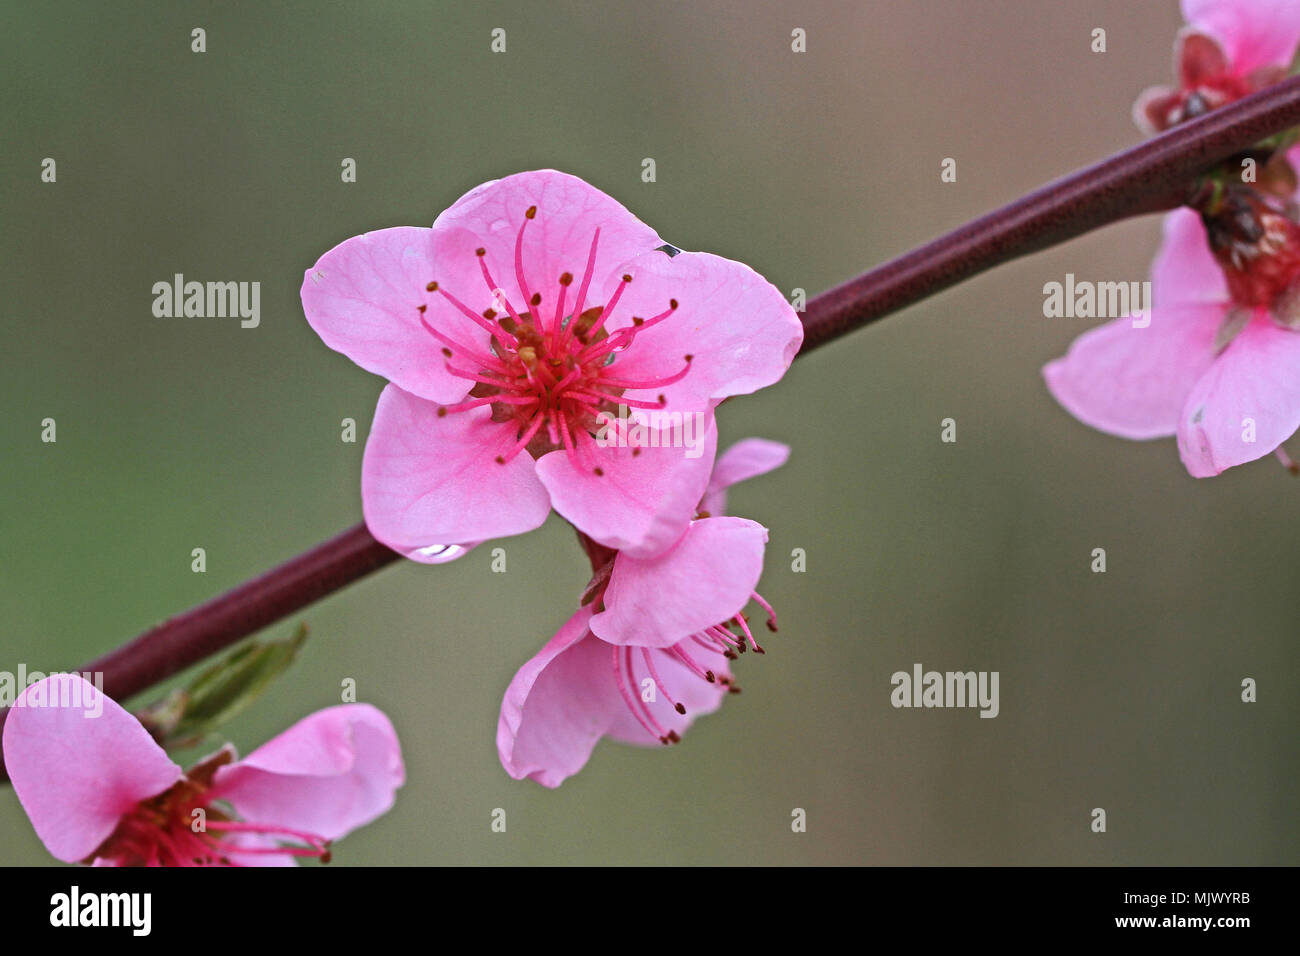 pink peach blossom and red bark Latin name prunus persica family rosaceae in Italy state symbol of Alabama, Delaware, Georgia and South Carolina Stock Photo